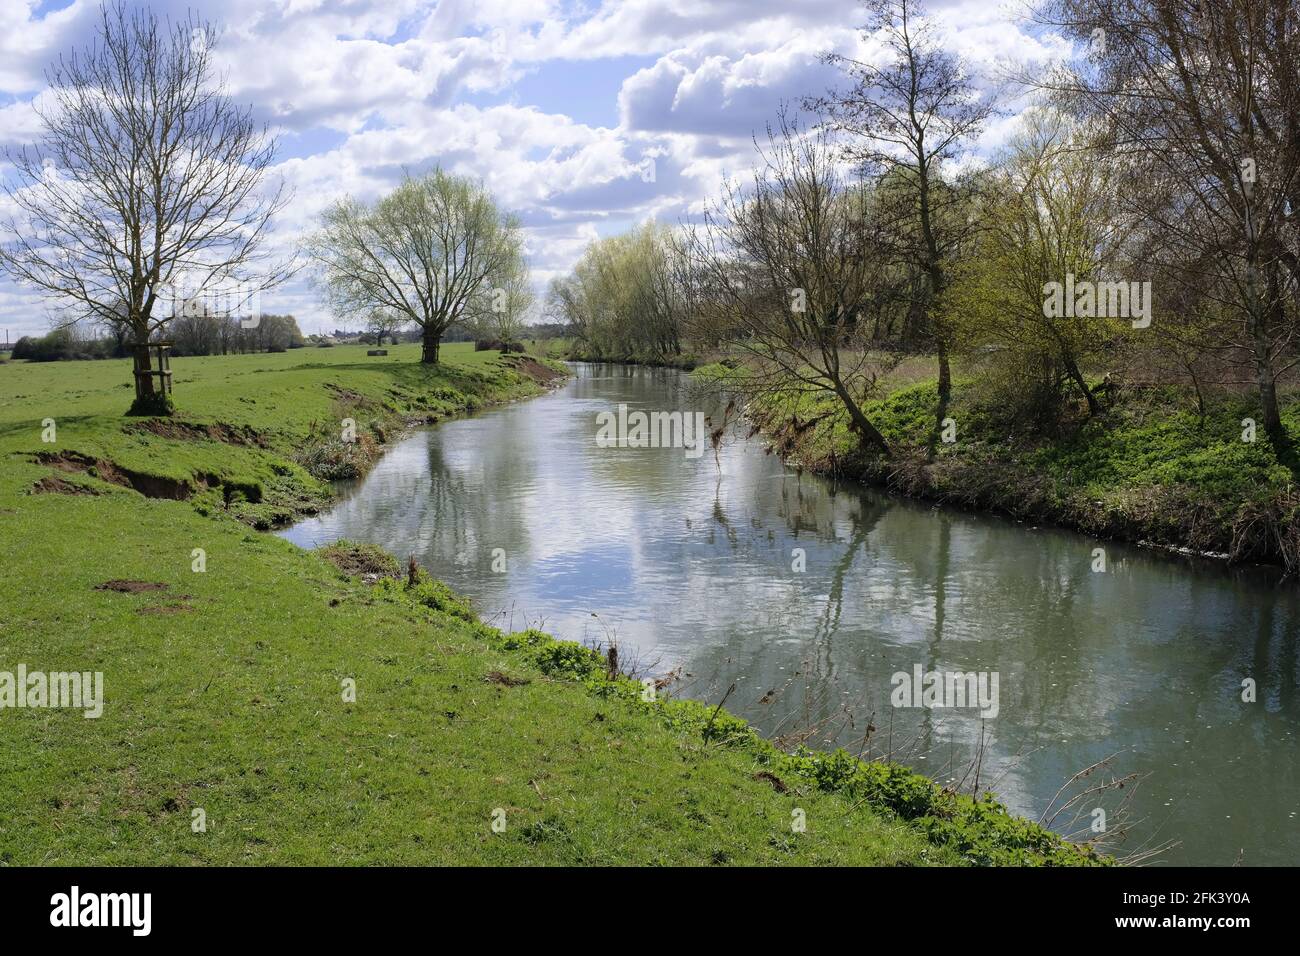 The Ivel river in Biggleswade , Bedfordshire, England Stock Photo